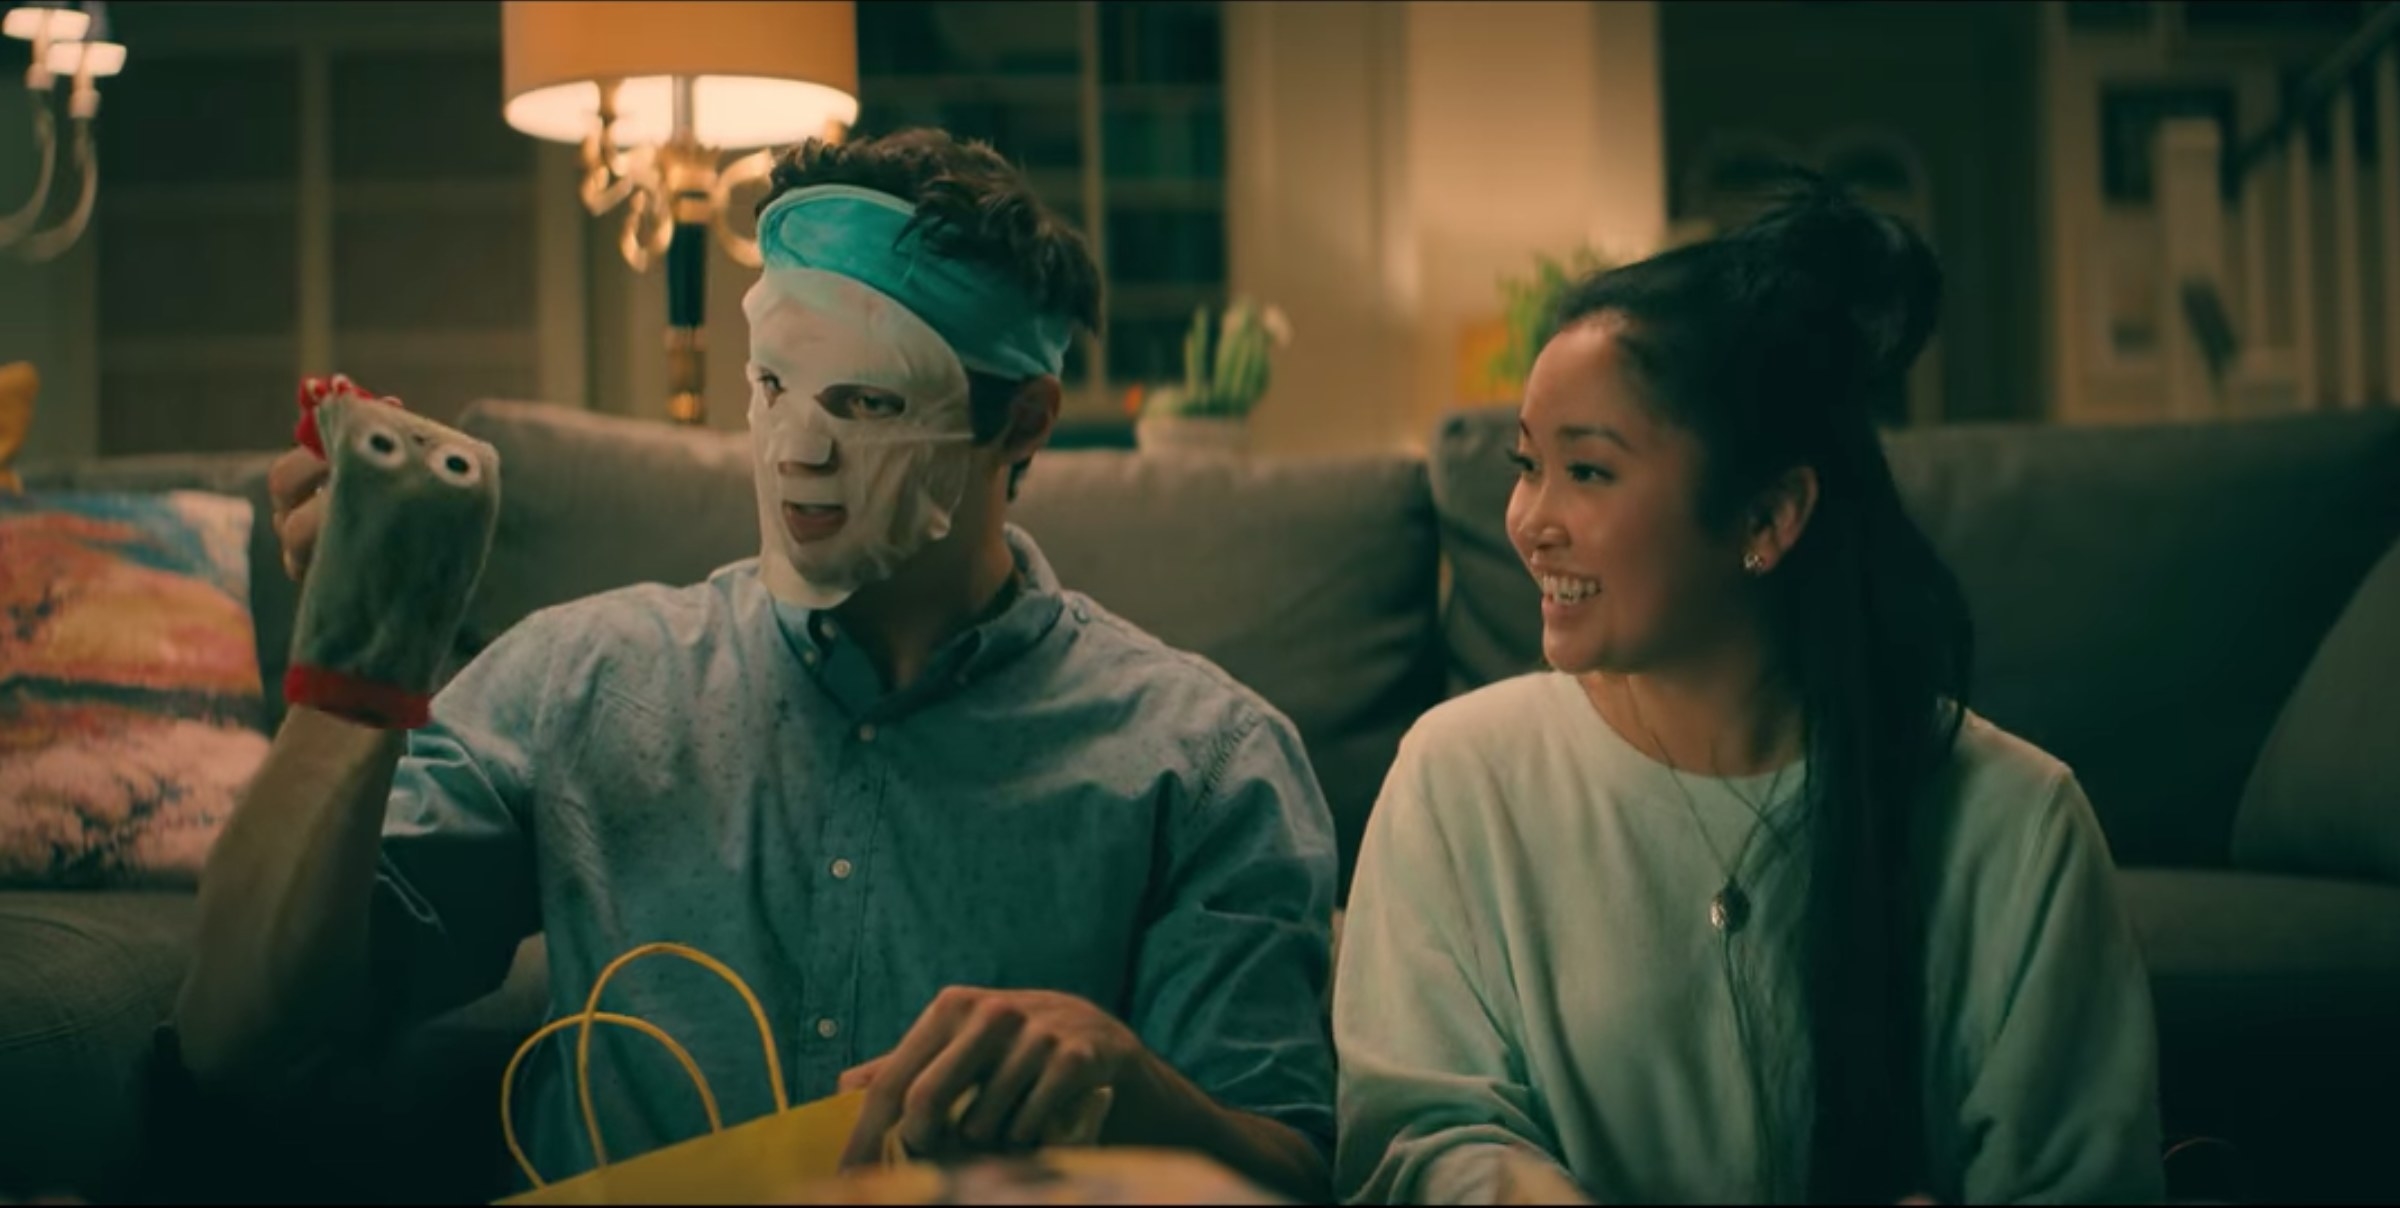 Peter wearing a face mask and holding character socks